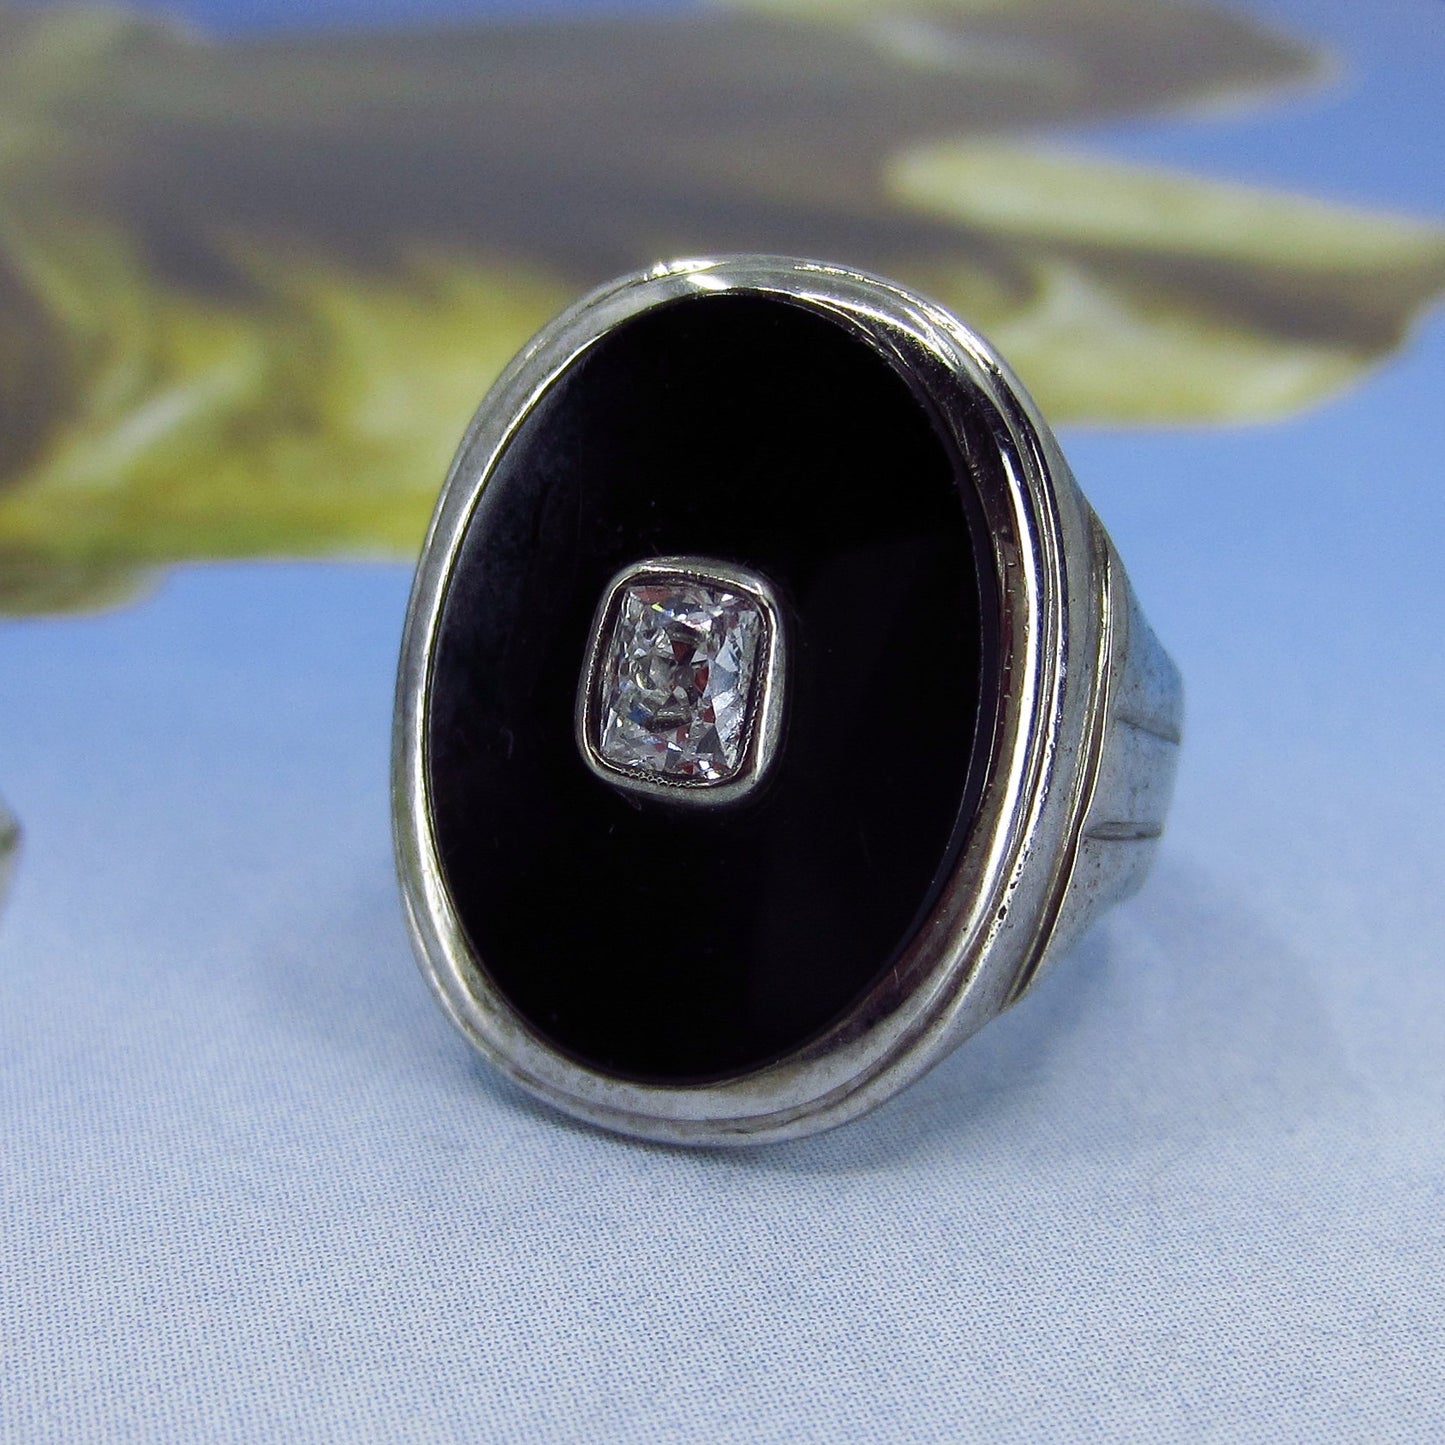 SOLD—Art Deco Old Mine Diamond and Onyx Signet Ring 10kc. 1920